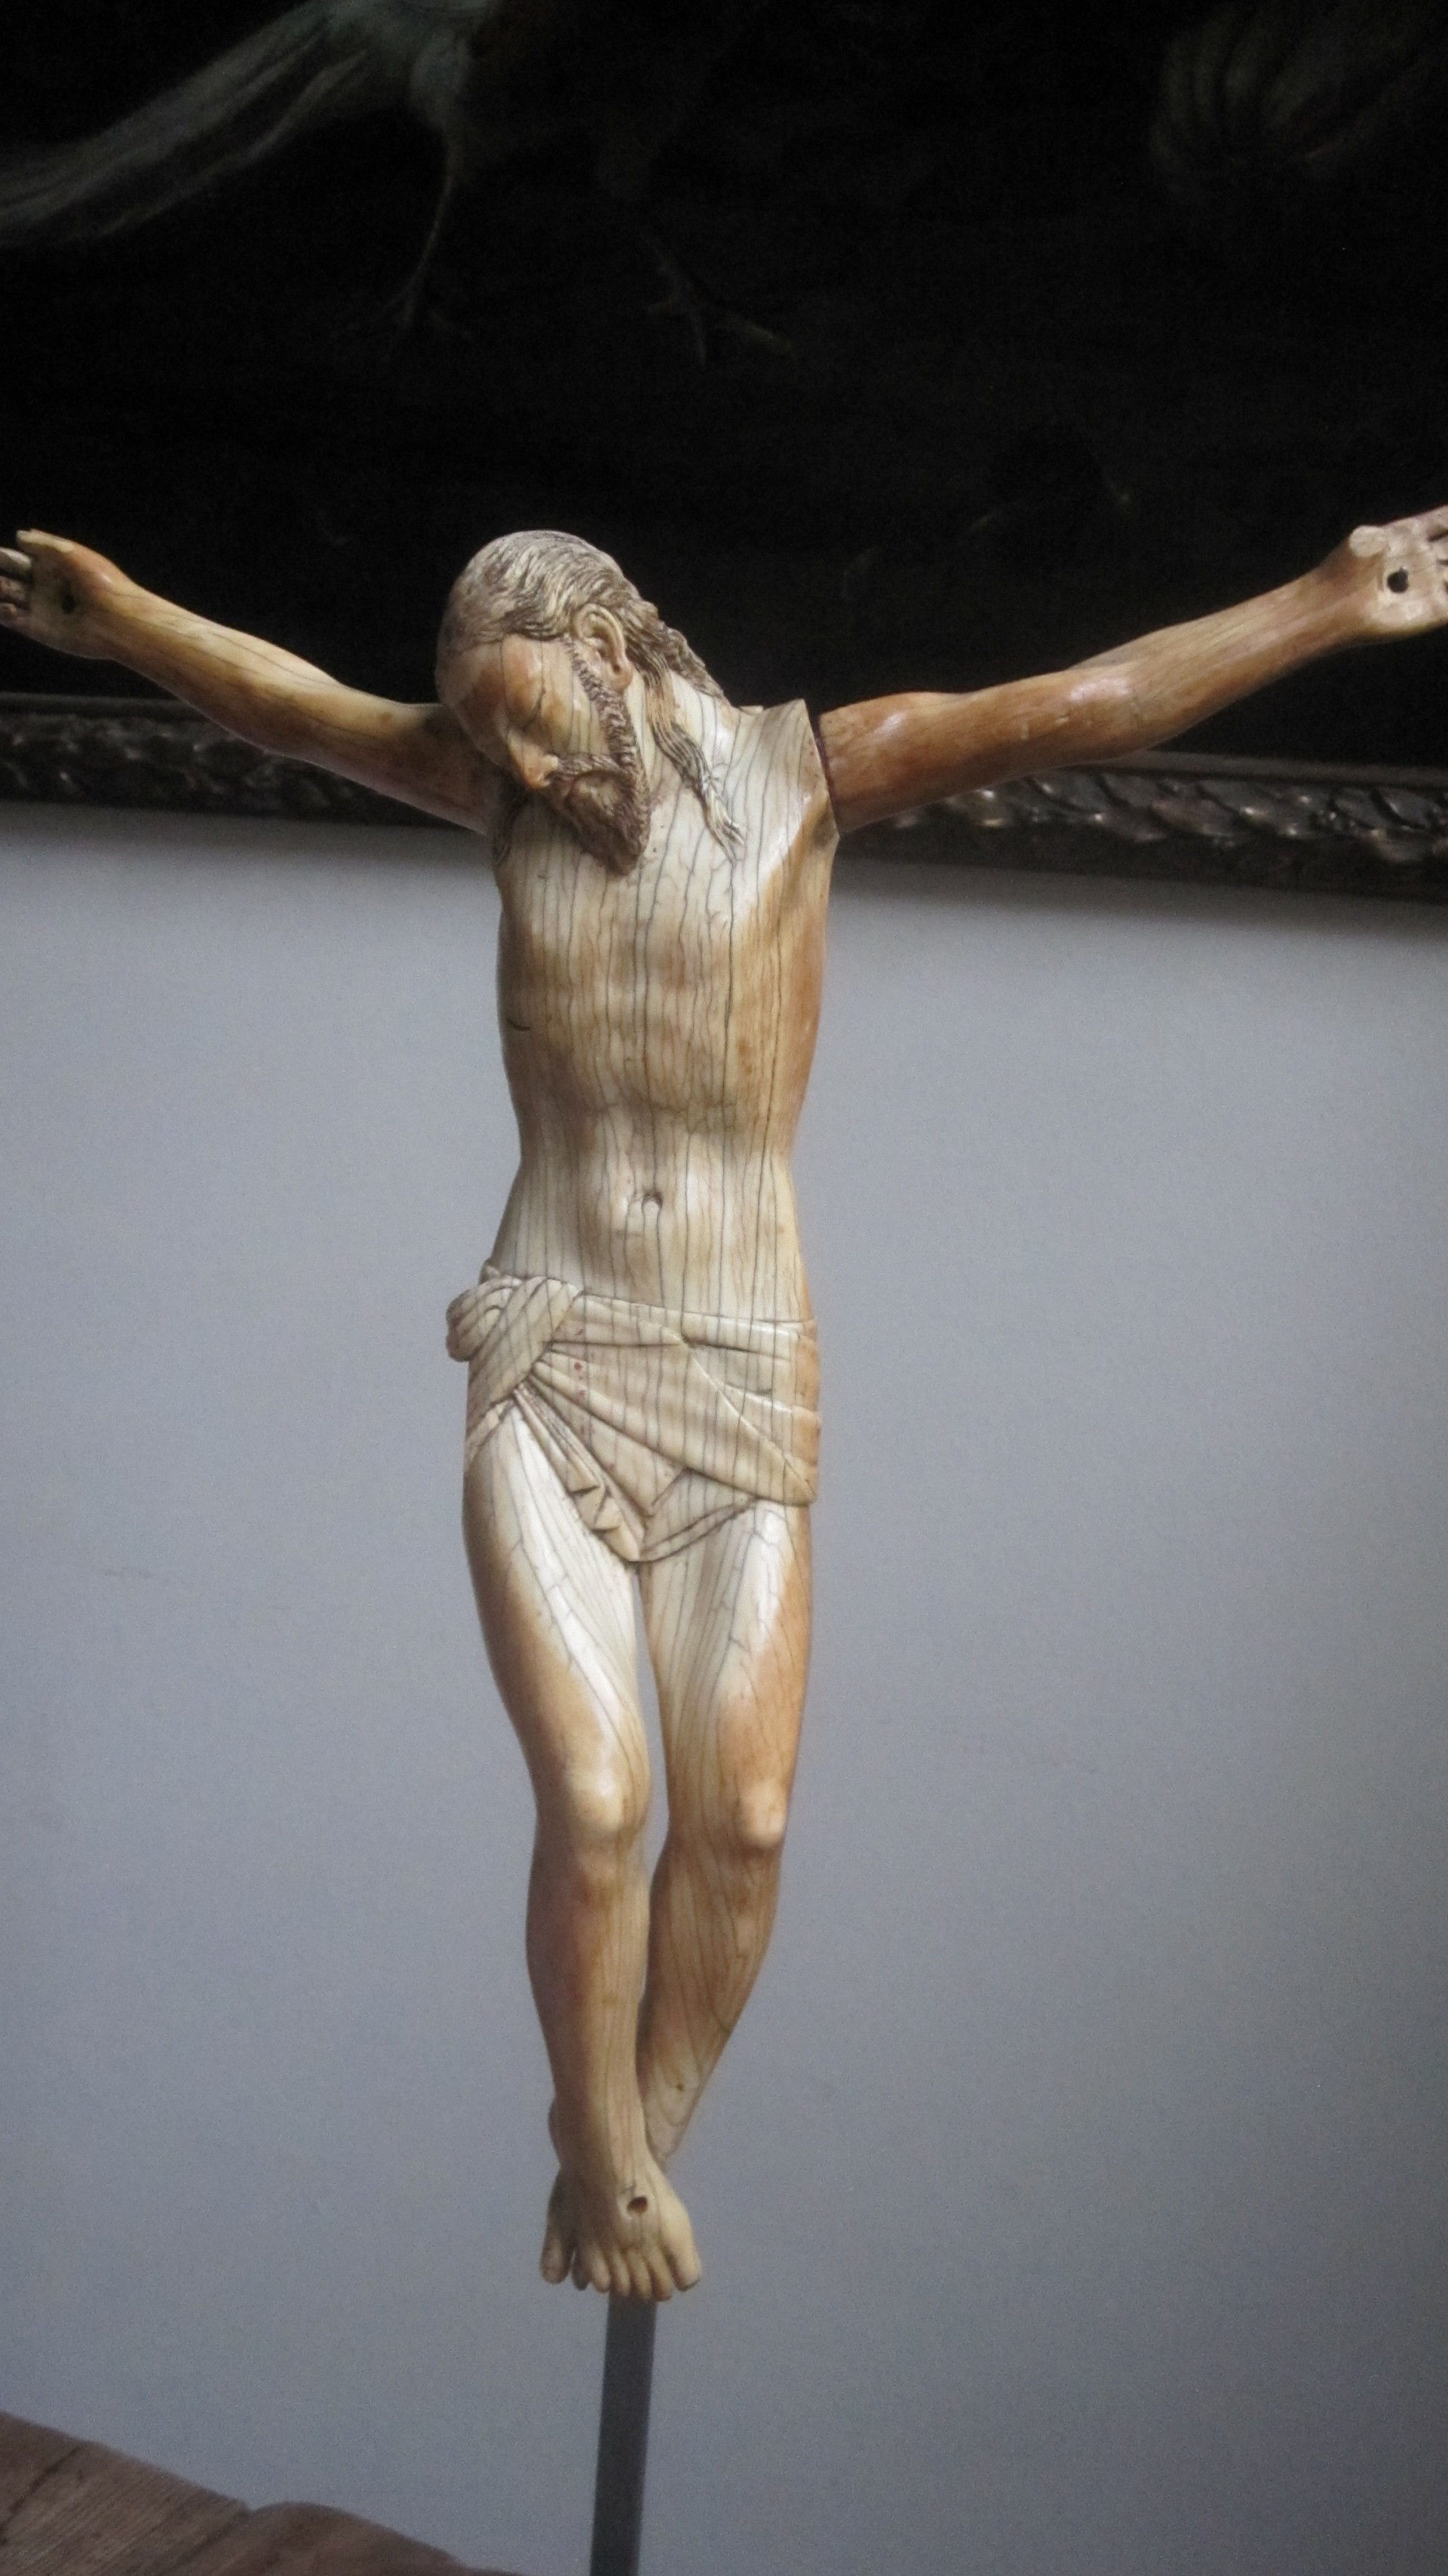 Christ crucified by unknown artist